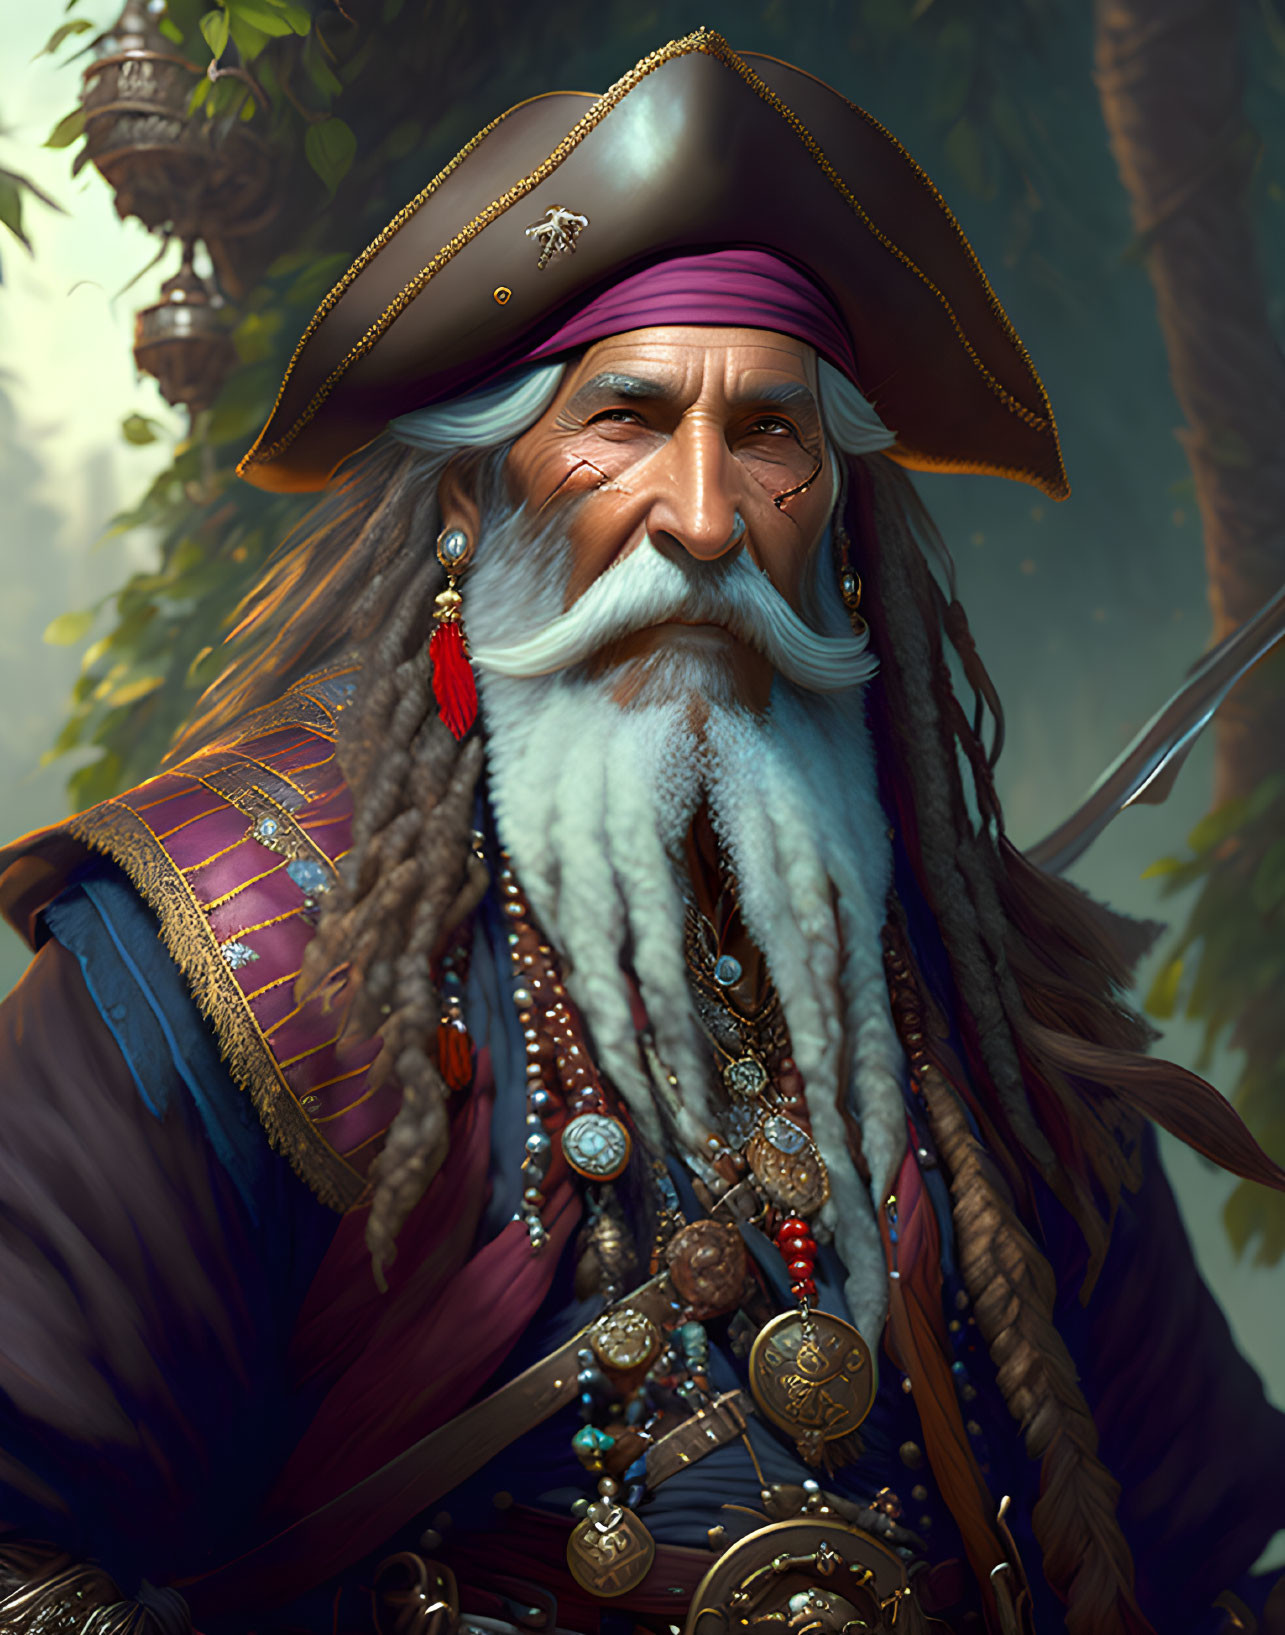 Illustration of a pirate captain with blue bandana, braided beard, necklaces, and tr